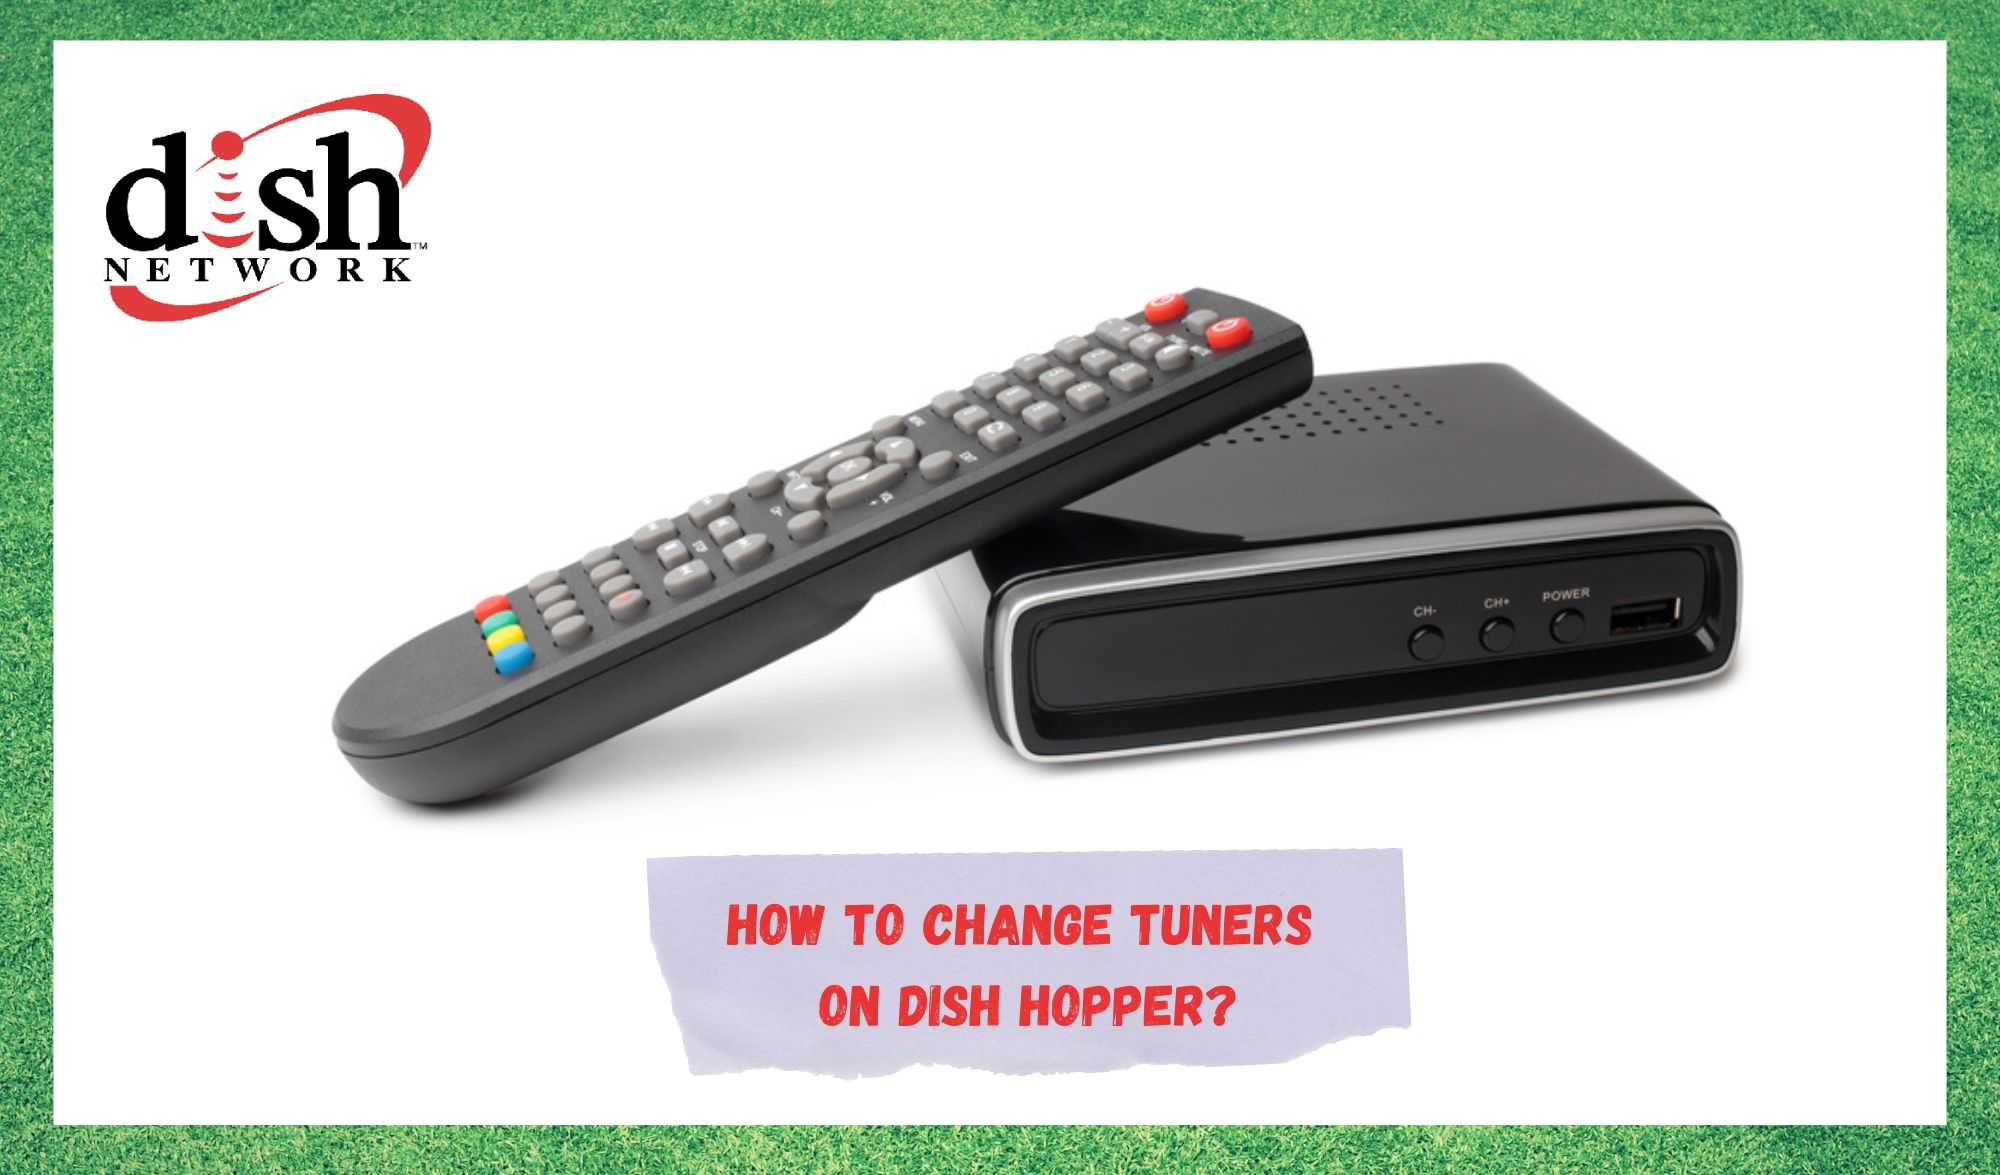 how to change tuners on dish hopper